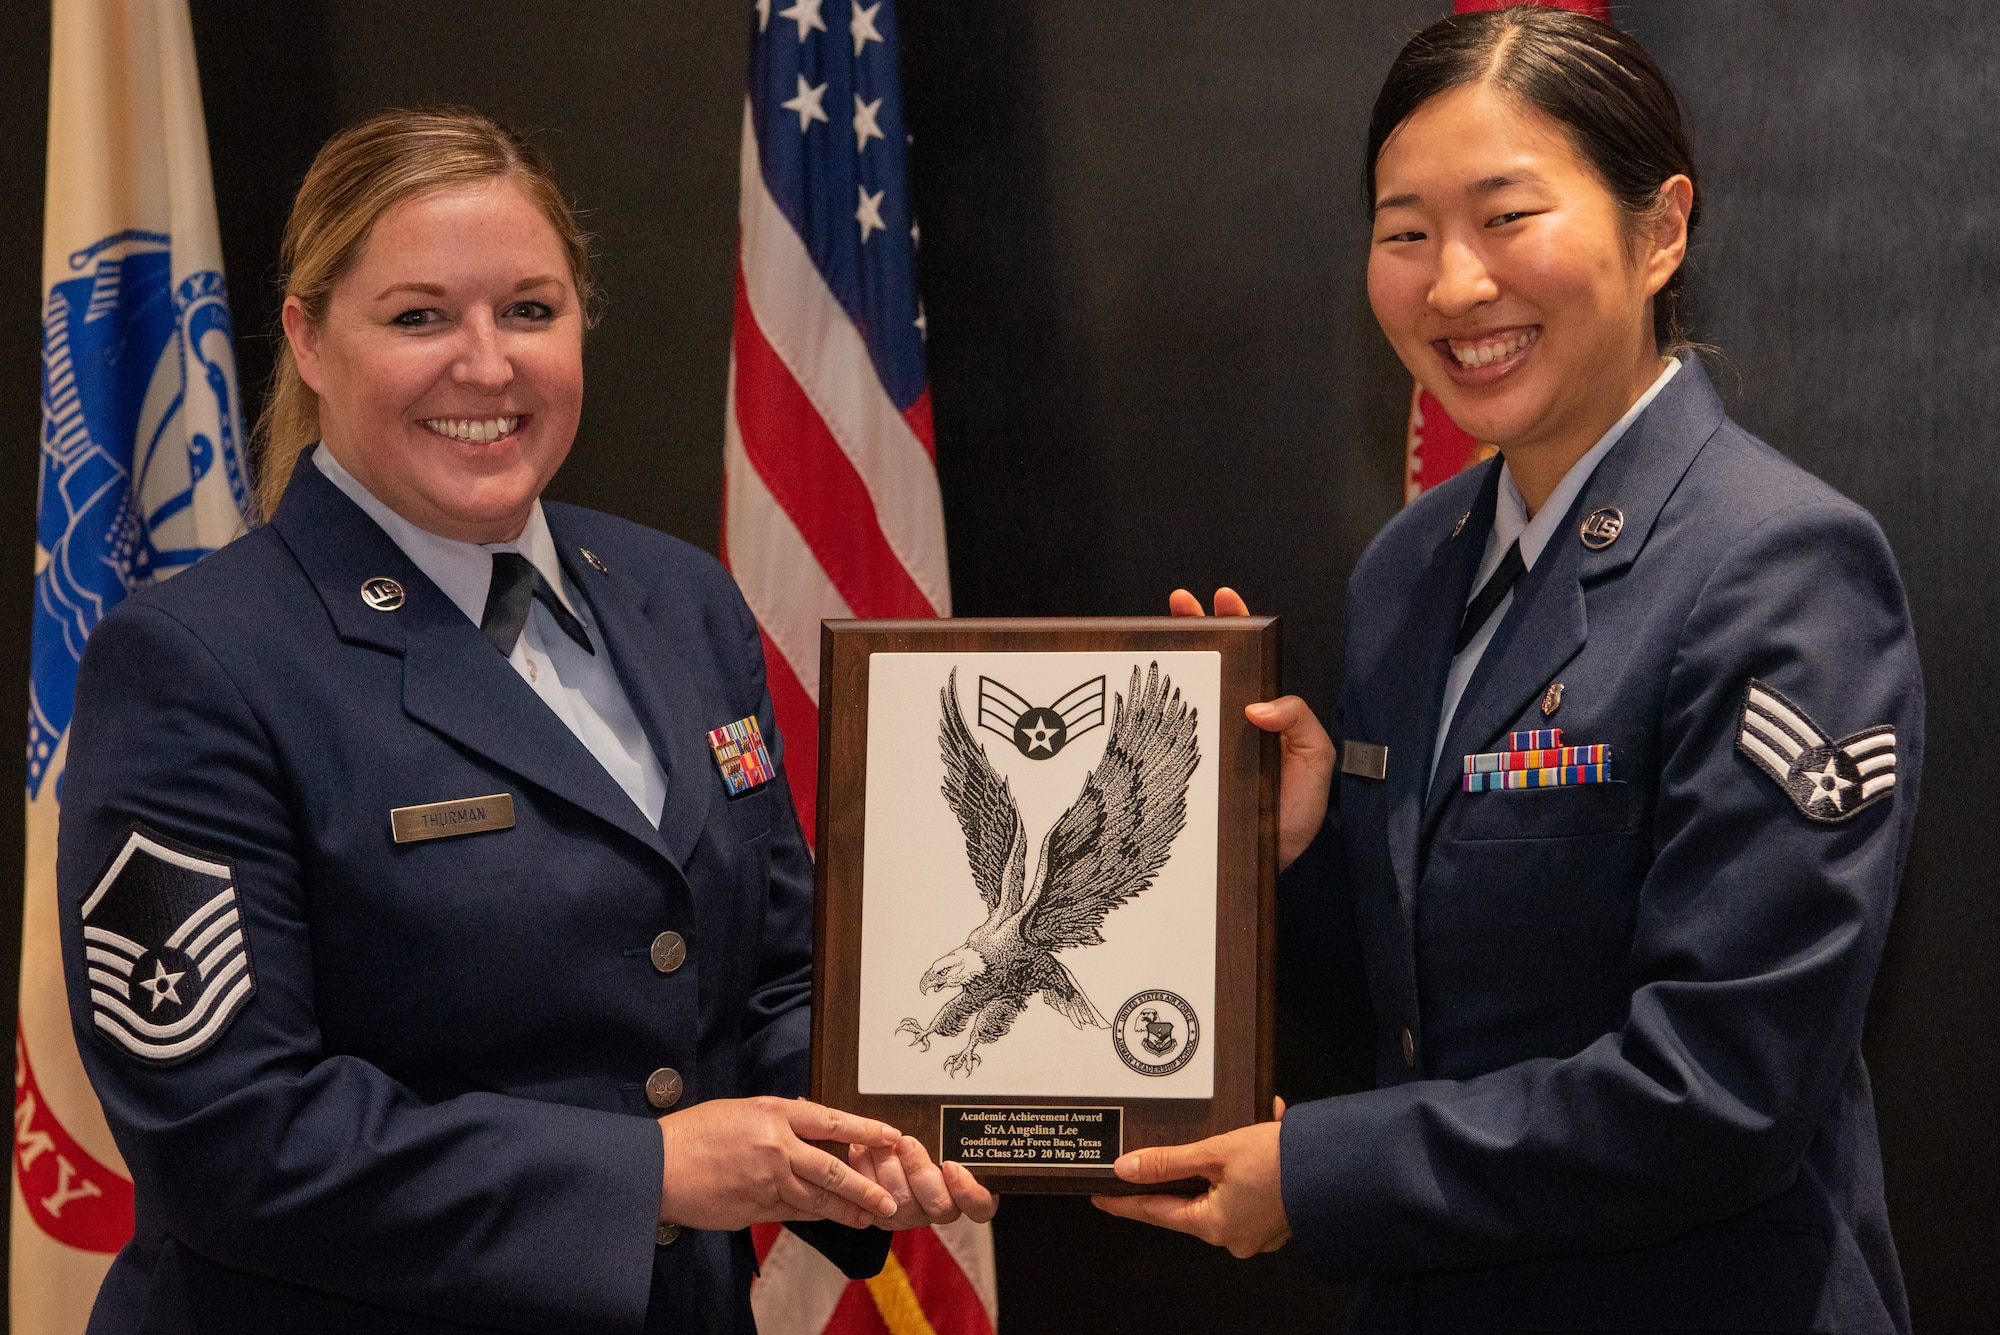 U.S. Air Force Senior Airman Angelina Lee, 17th Healthcare Operations Squadron immunizations technician, receives the academic excellence award during the Airman Leadership School graduation of class 22-D at the Powell Event Center, Goodfellow Air Force Base, Texas, May 20, 2022. The academic excellence award is given to the graduate with the best performance in performance tasks and the capstone exercise. (U.S. Air Force Photo by Senior Airman Michael Bowman)